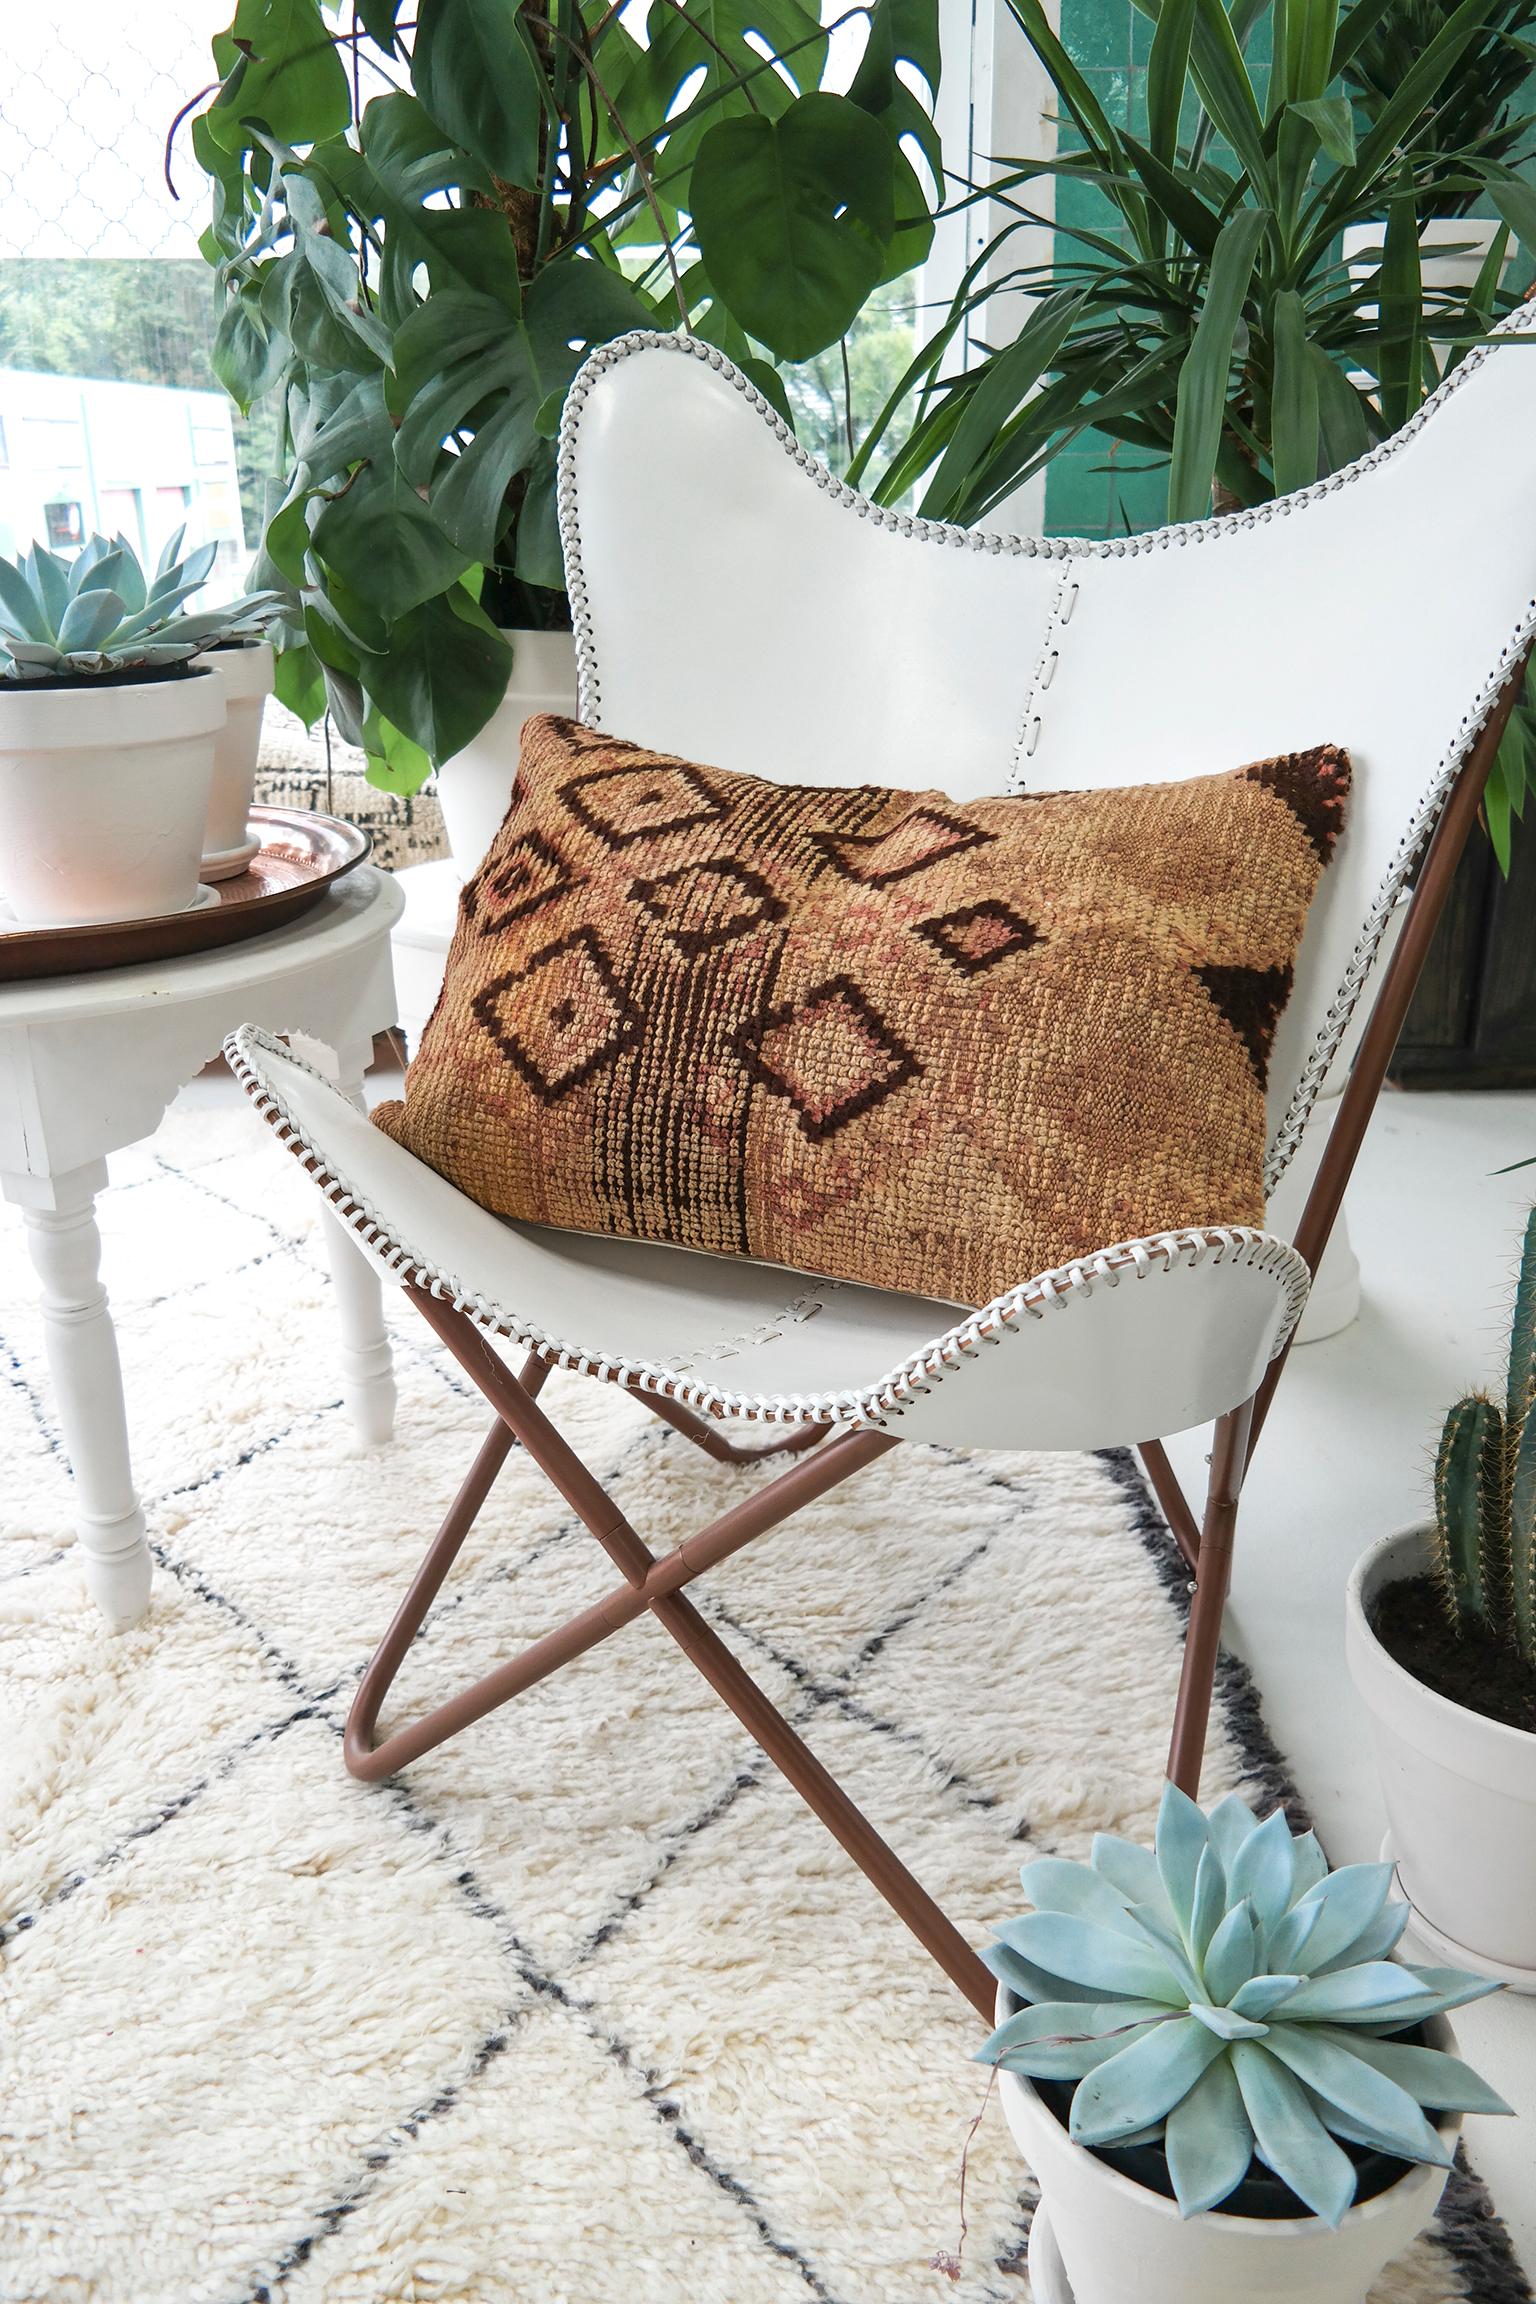 Cushion custom-made from a more than 40 years old Moroccan rug, searched and selected by ourselves. This pillow is a one-of-a-kind with beautiful autumn colors. The beauty of our pillows is that they are timeless and blend in every interior. Or